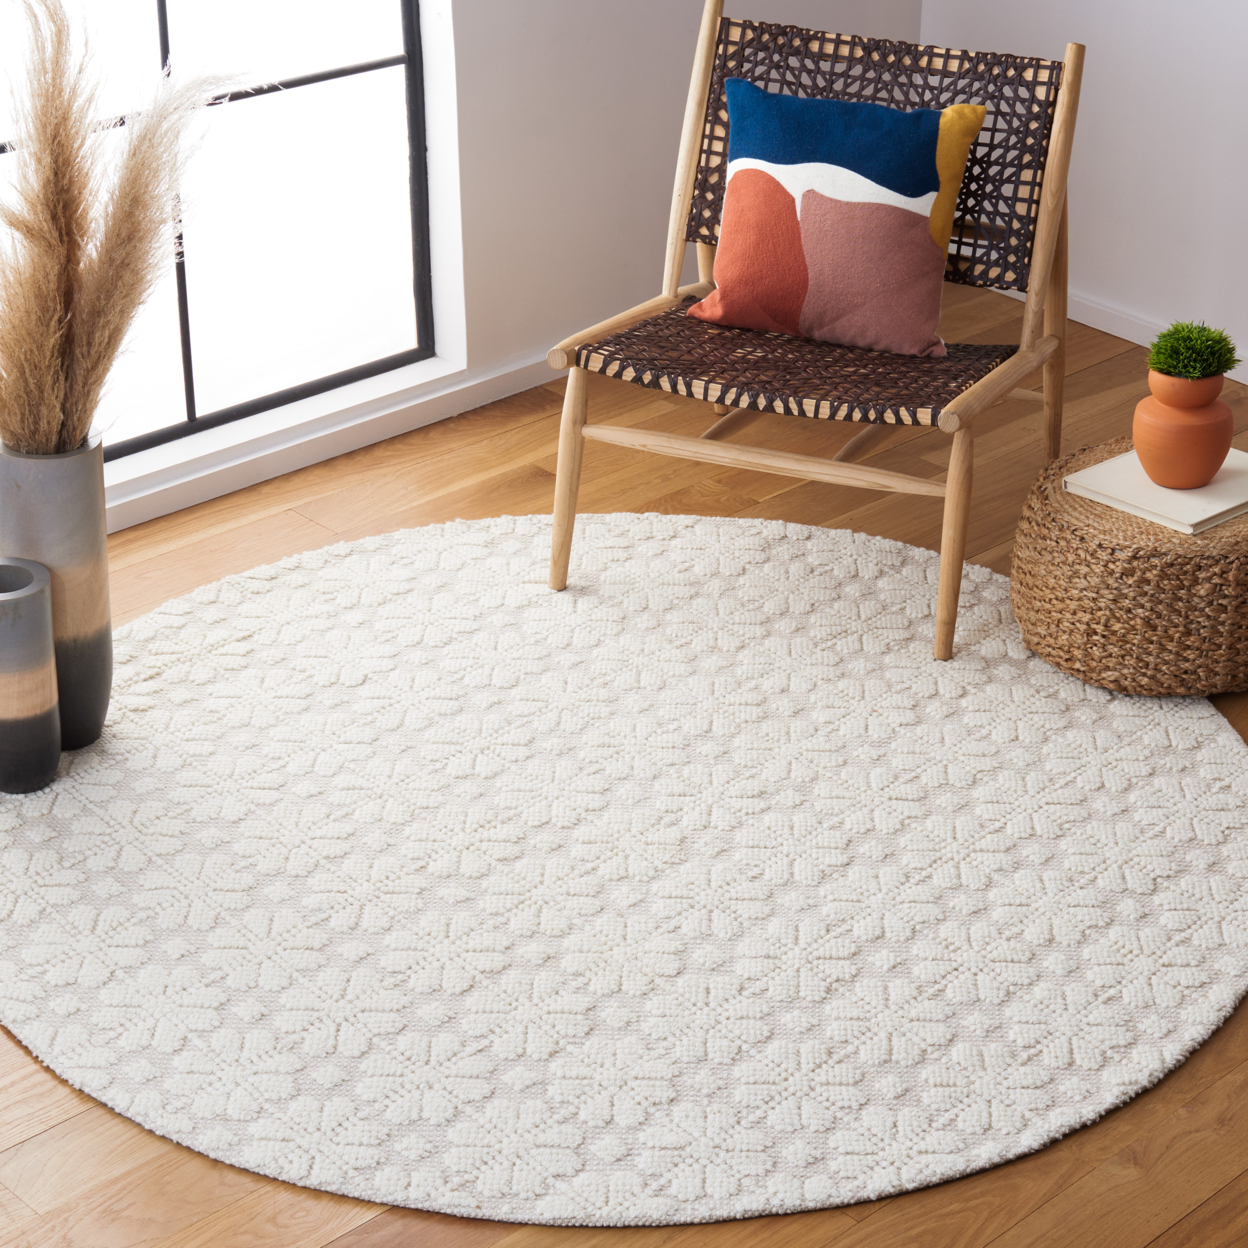 SAFAVIEH Vermont Collection VRM106A Handwoven Ivory Rug - 2-3 X 12